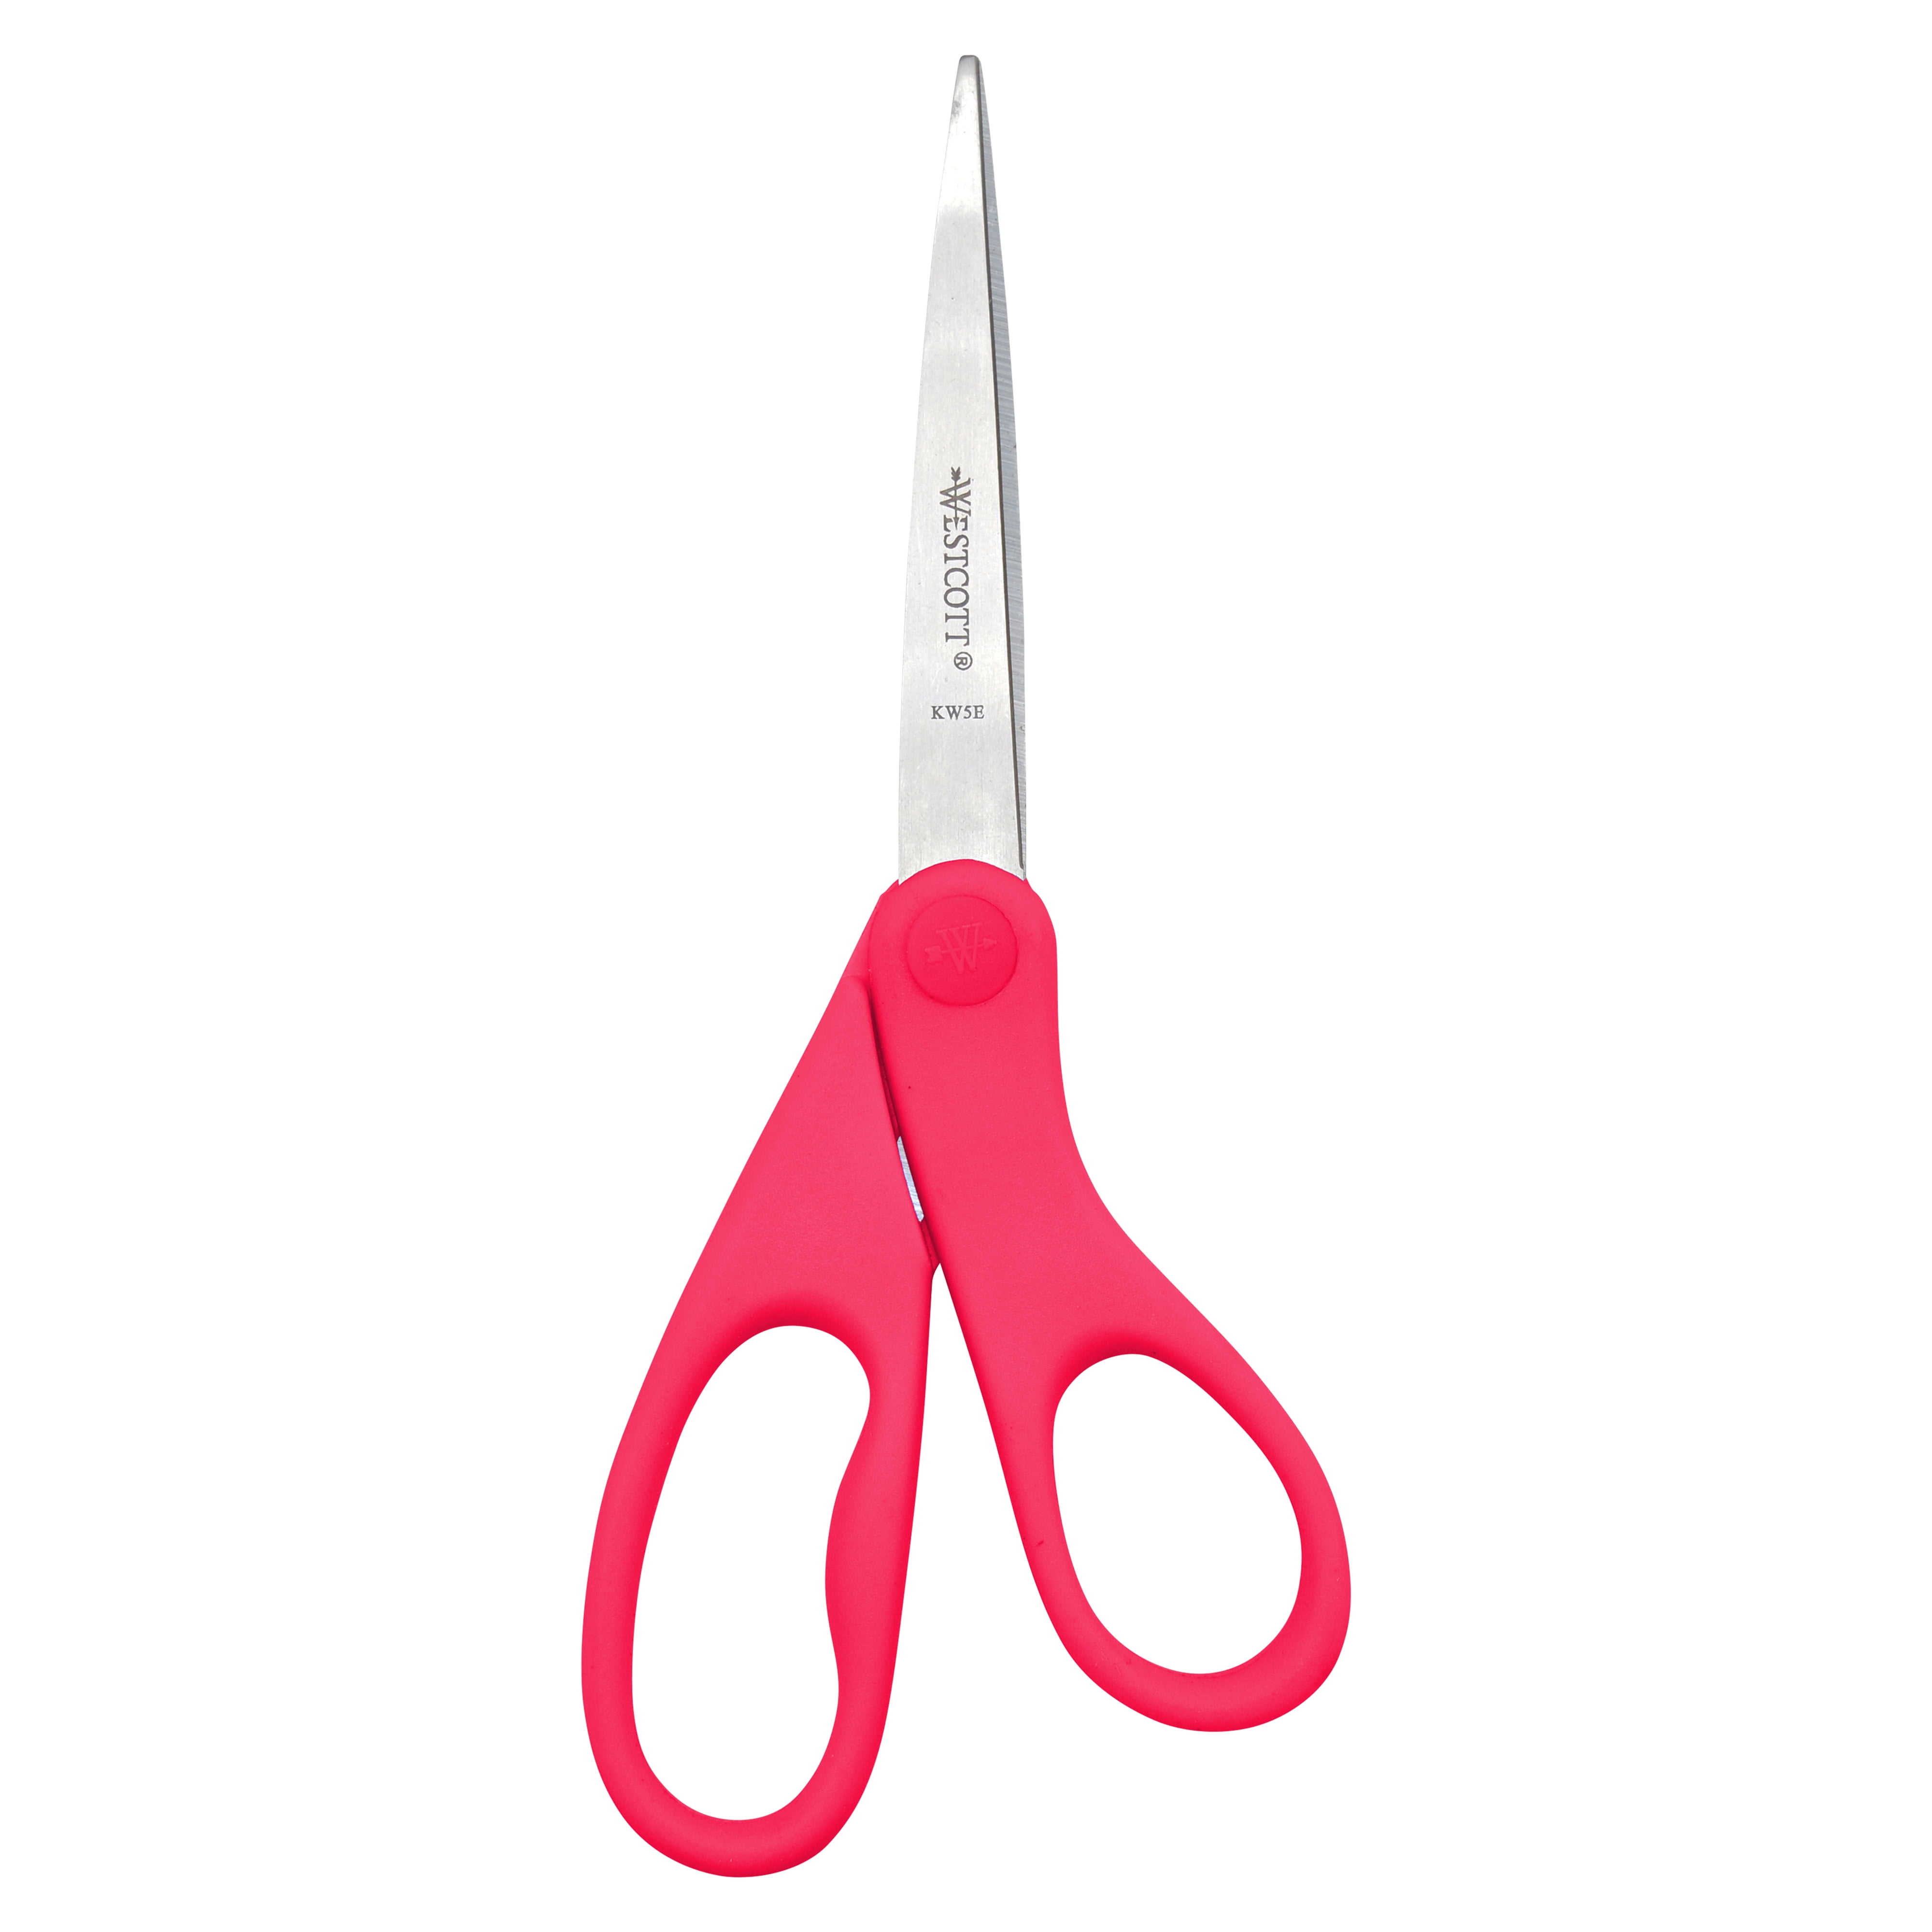 Westcott Student Scissors With Antimicrobial Protection Assorted Colors 7  Long 14231